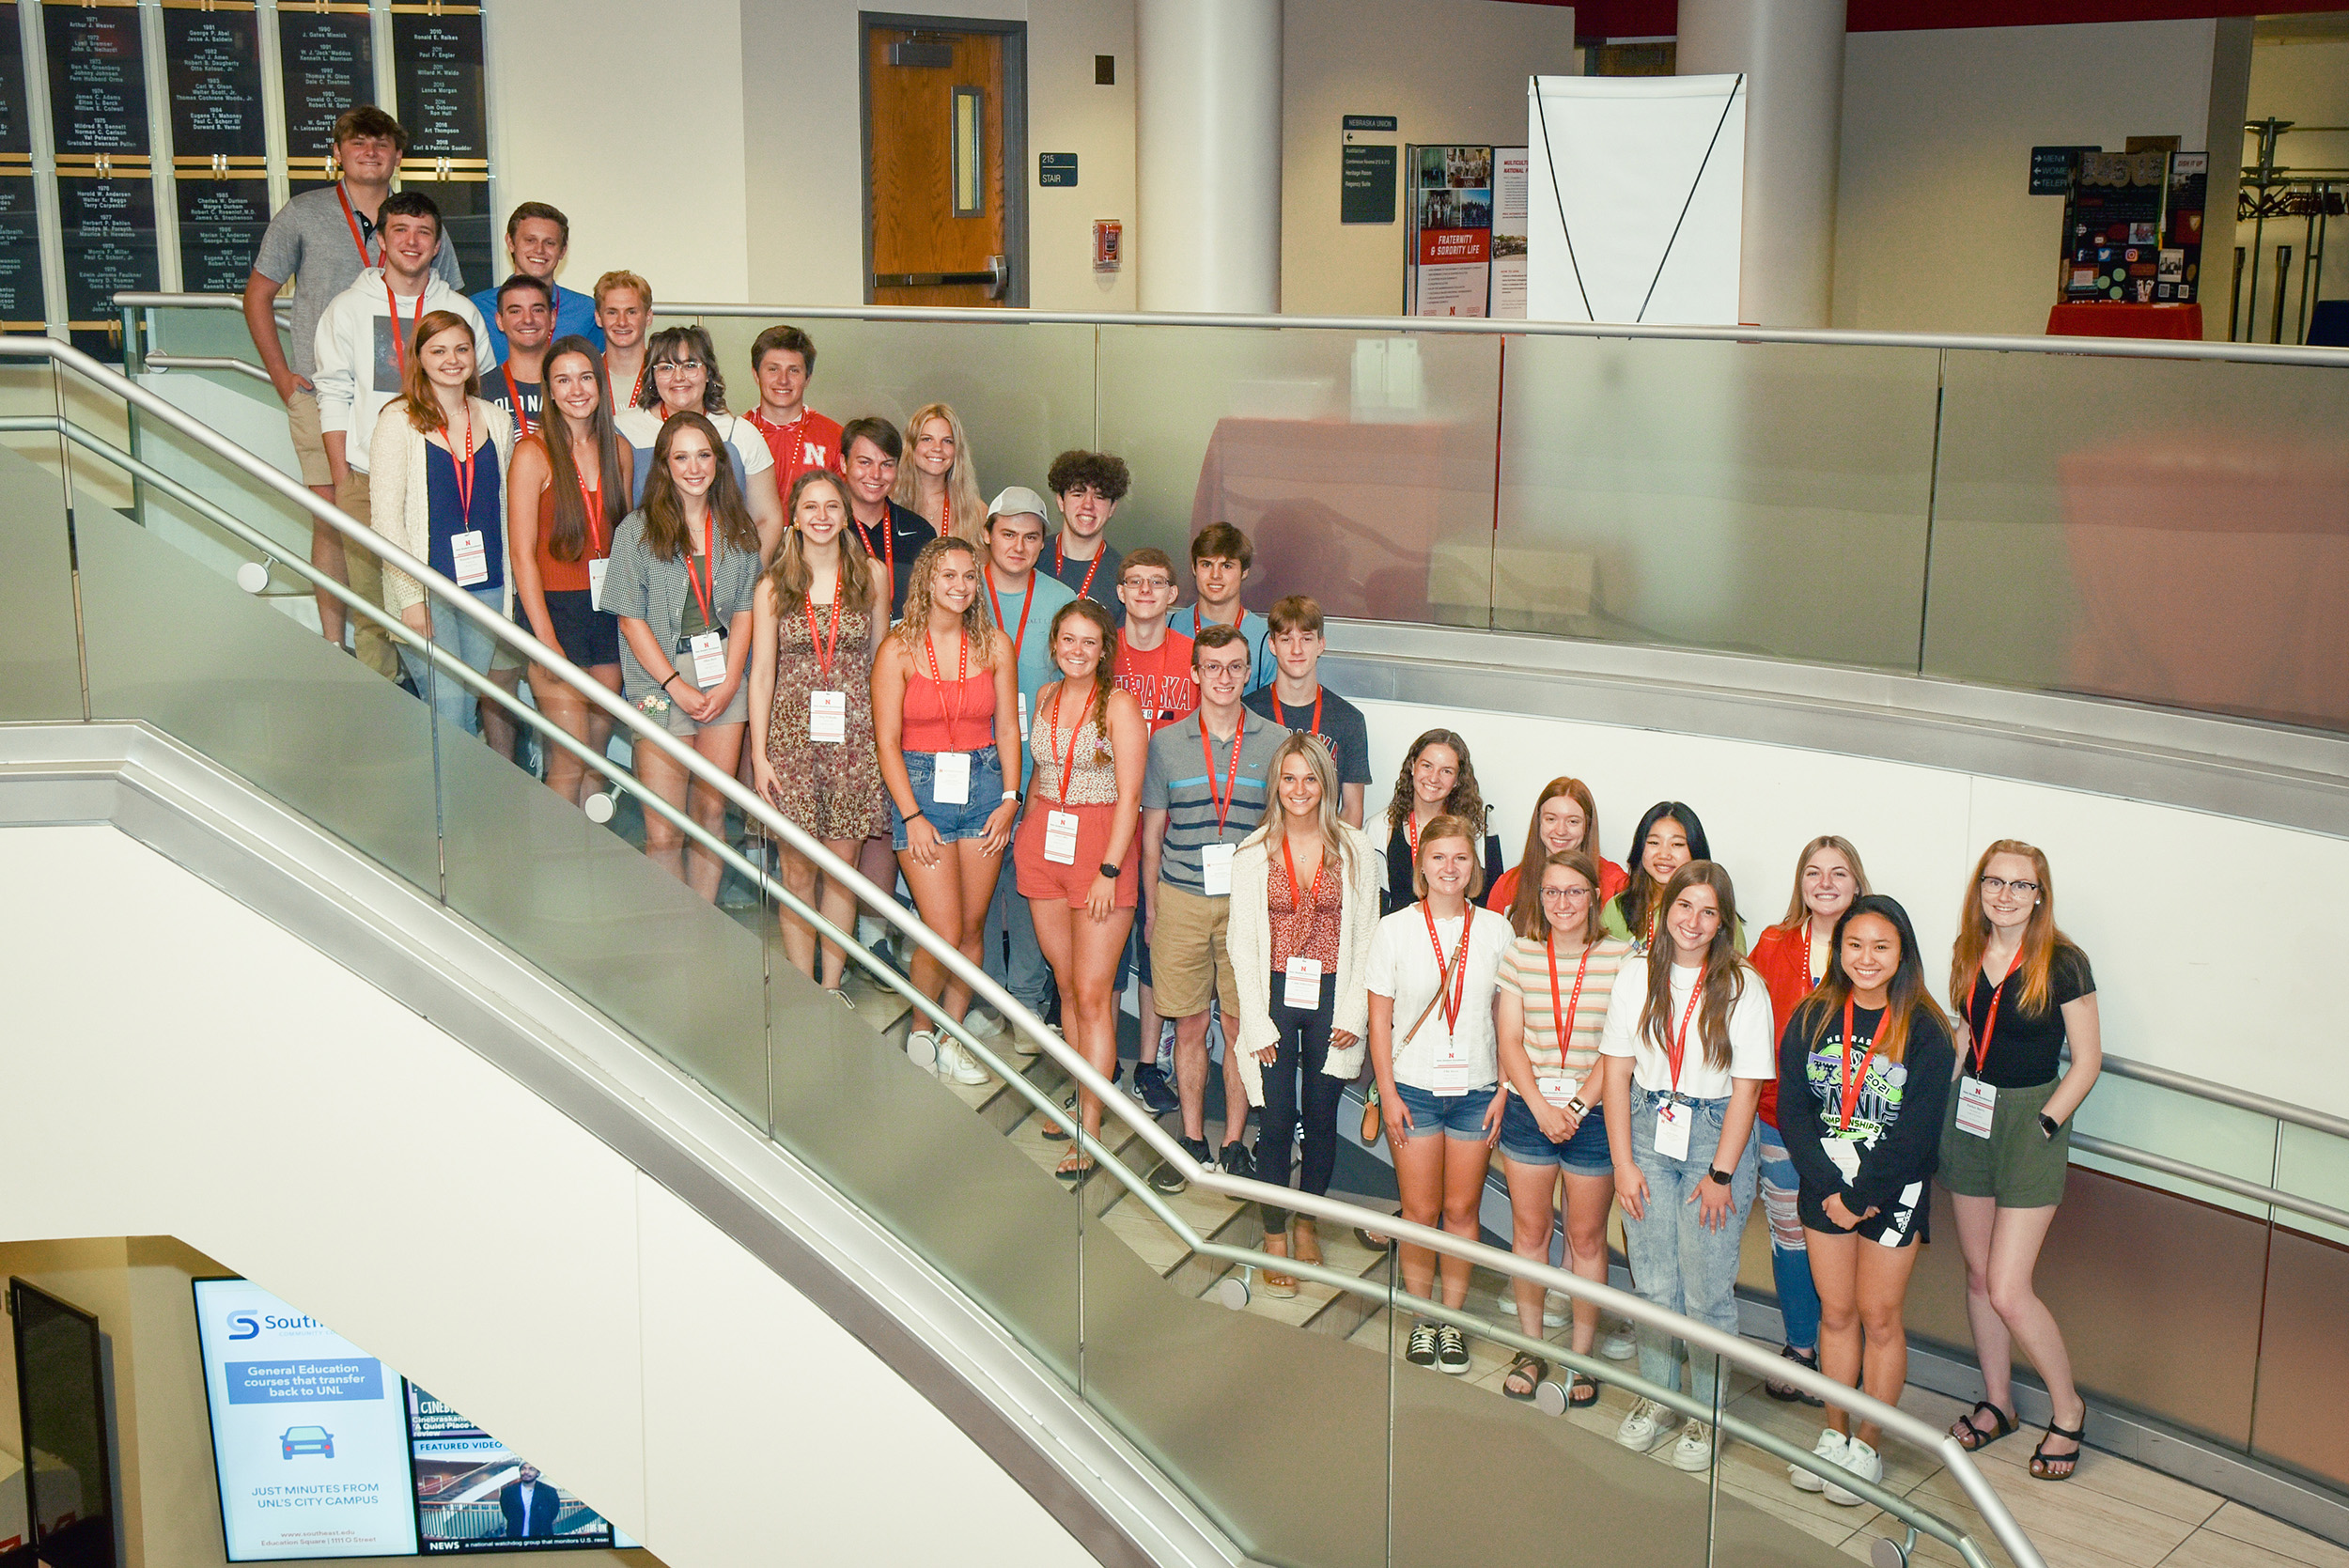 Forty first-year students will join the Nebraska Business Honors Academy at the University of Nebraska–Lincoln this fall. The cohort will develop skills through an enhanced curriculum.